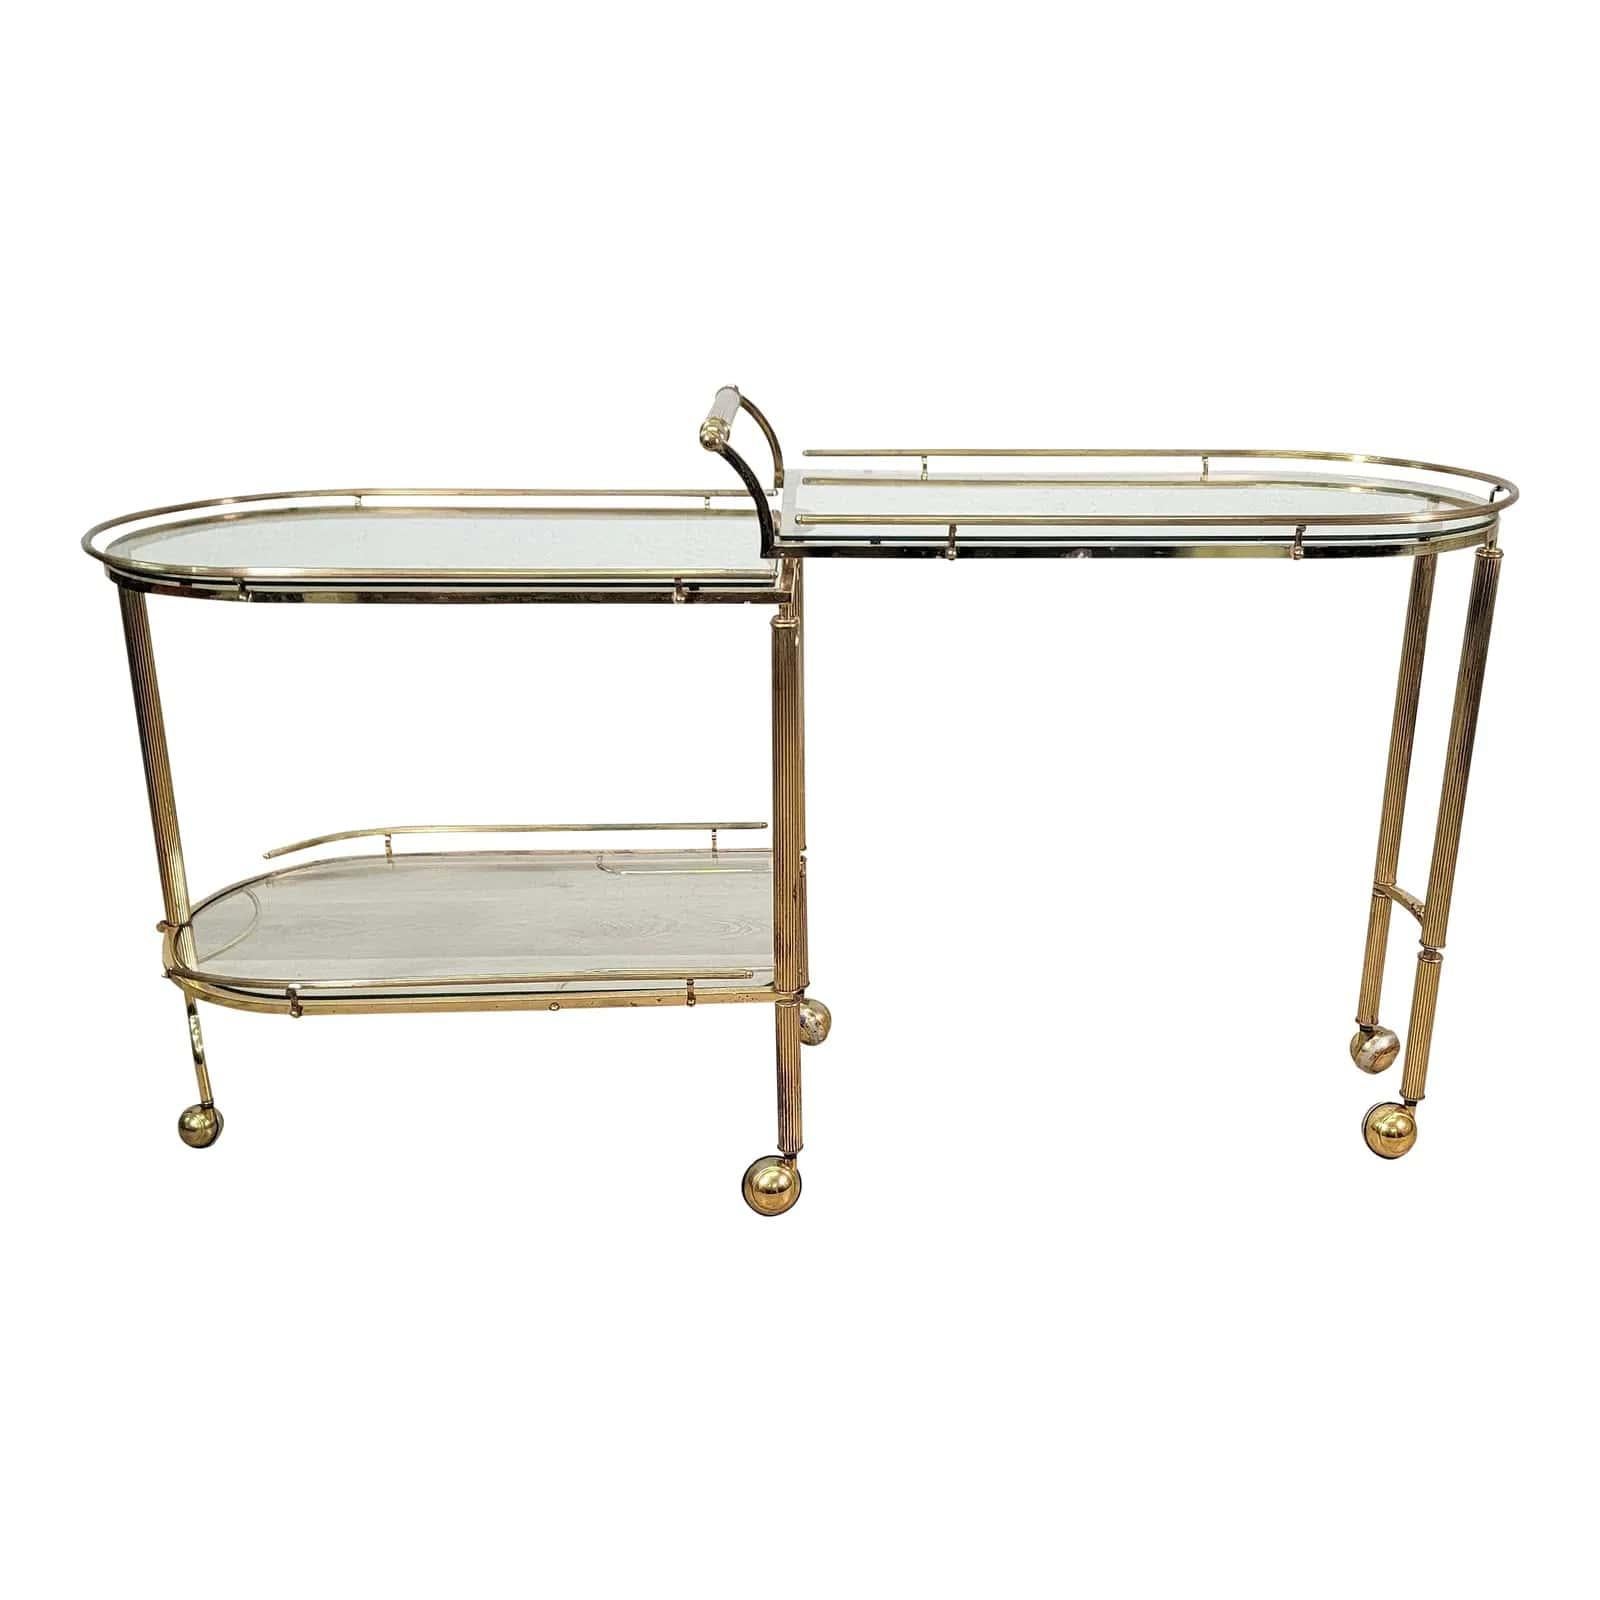 Fabulous solid brass and glass folding bar cart. The handcrafted cart can be extended to provide more space while entertaining. It has five legs with smoothly gliding wheels. The middle leg locks into place with a hook or unlocks to move the bar a